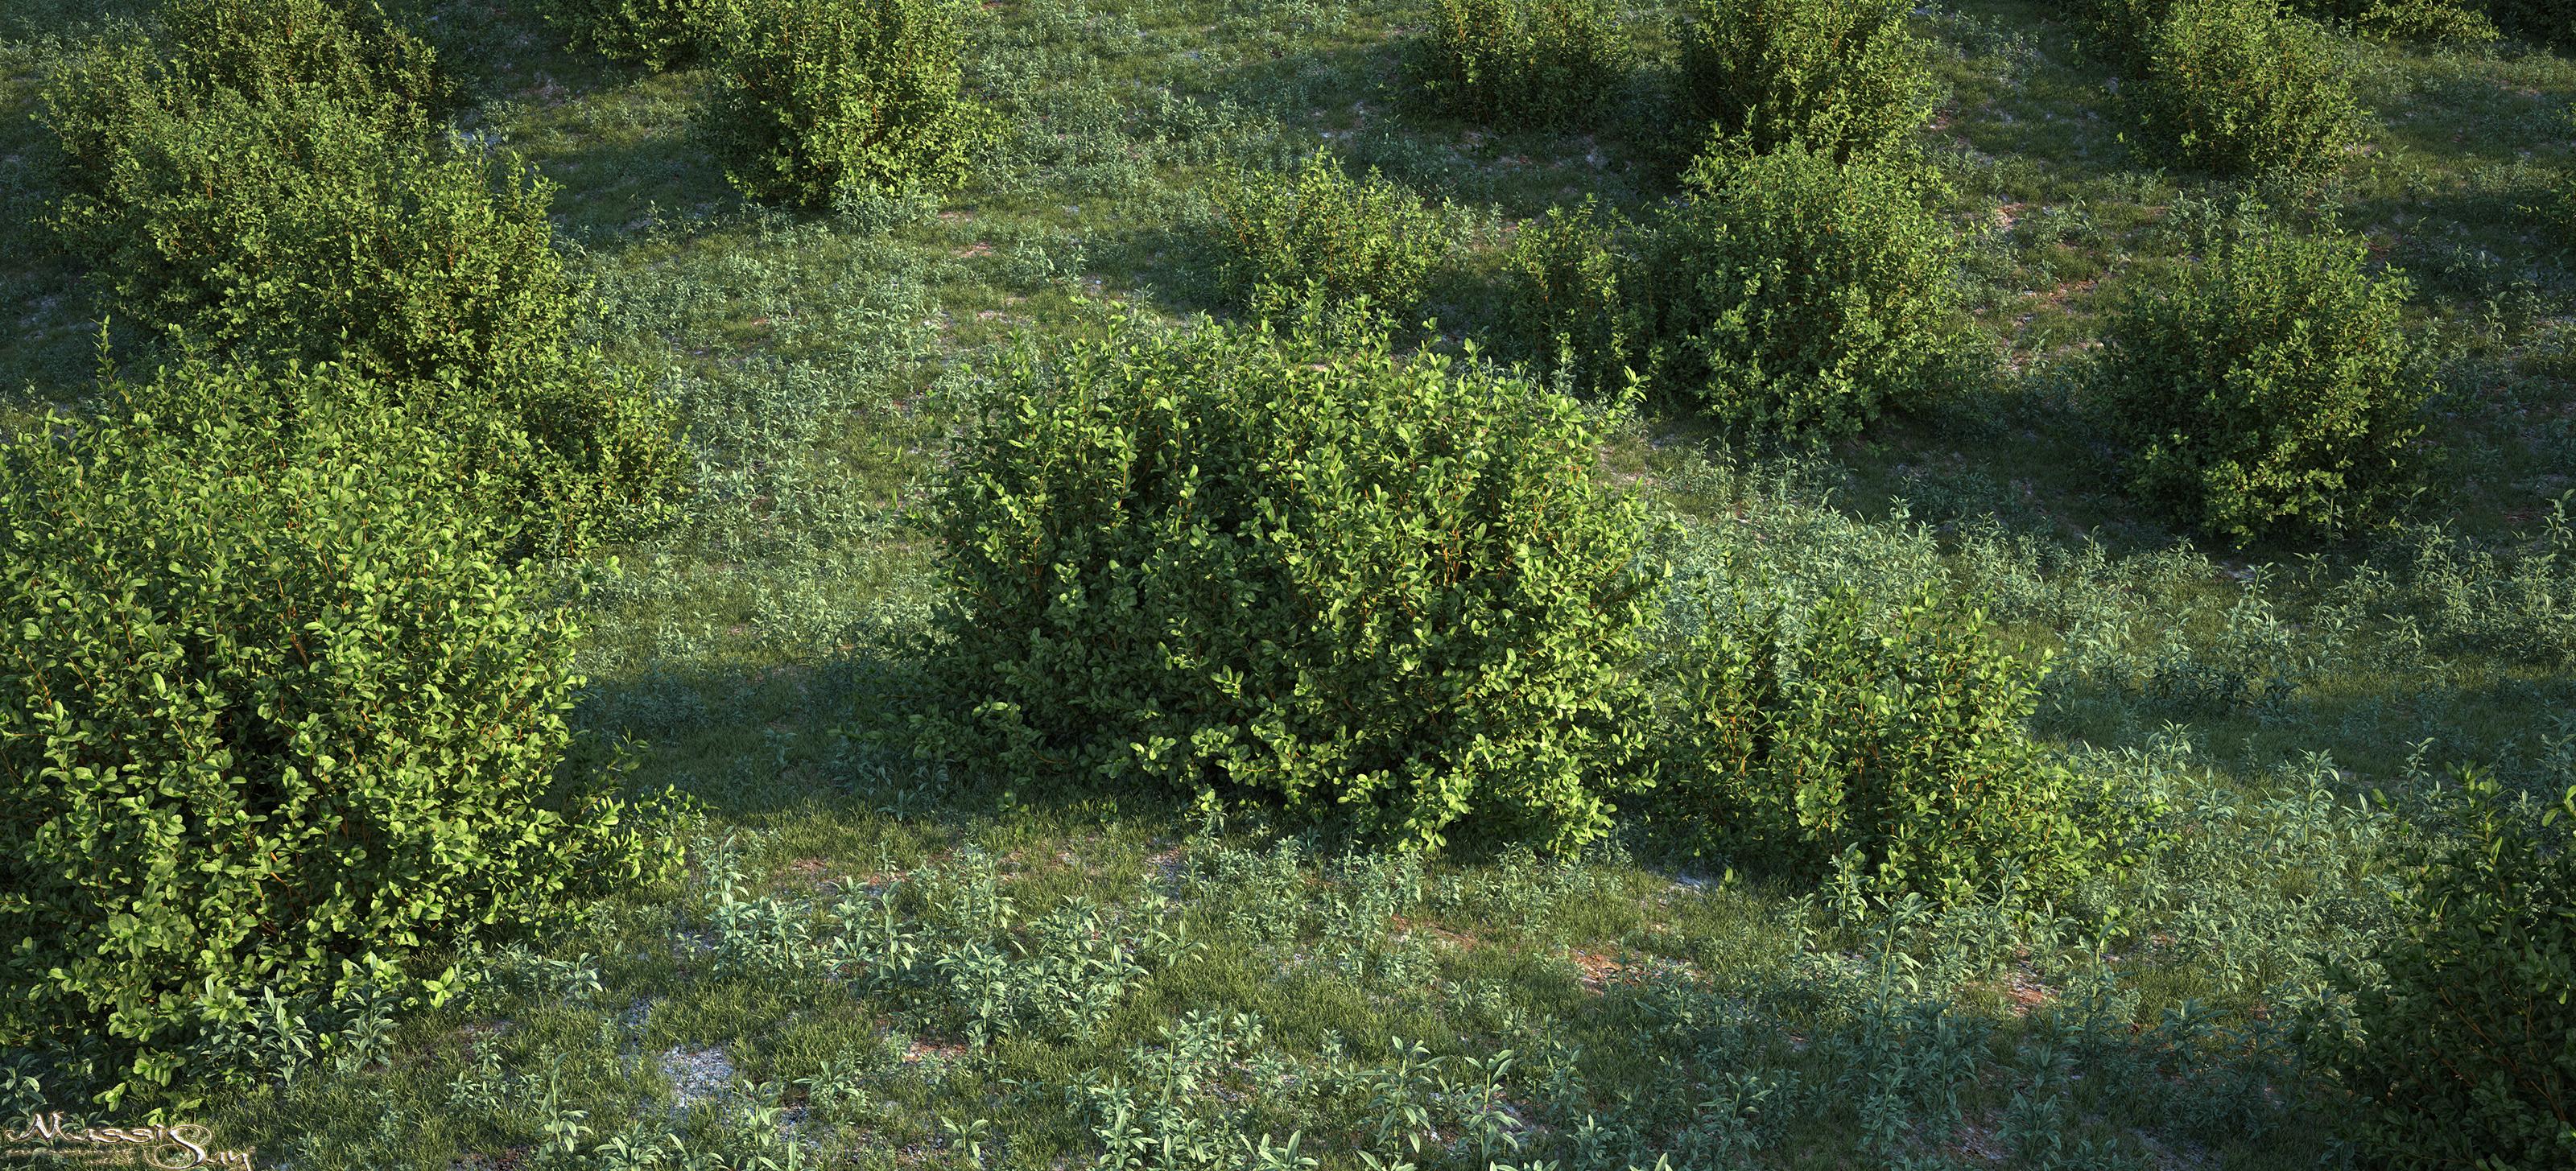 bushes and wild grasses - Gallery - Exlevel Forum